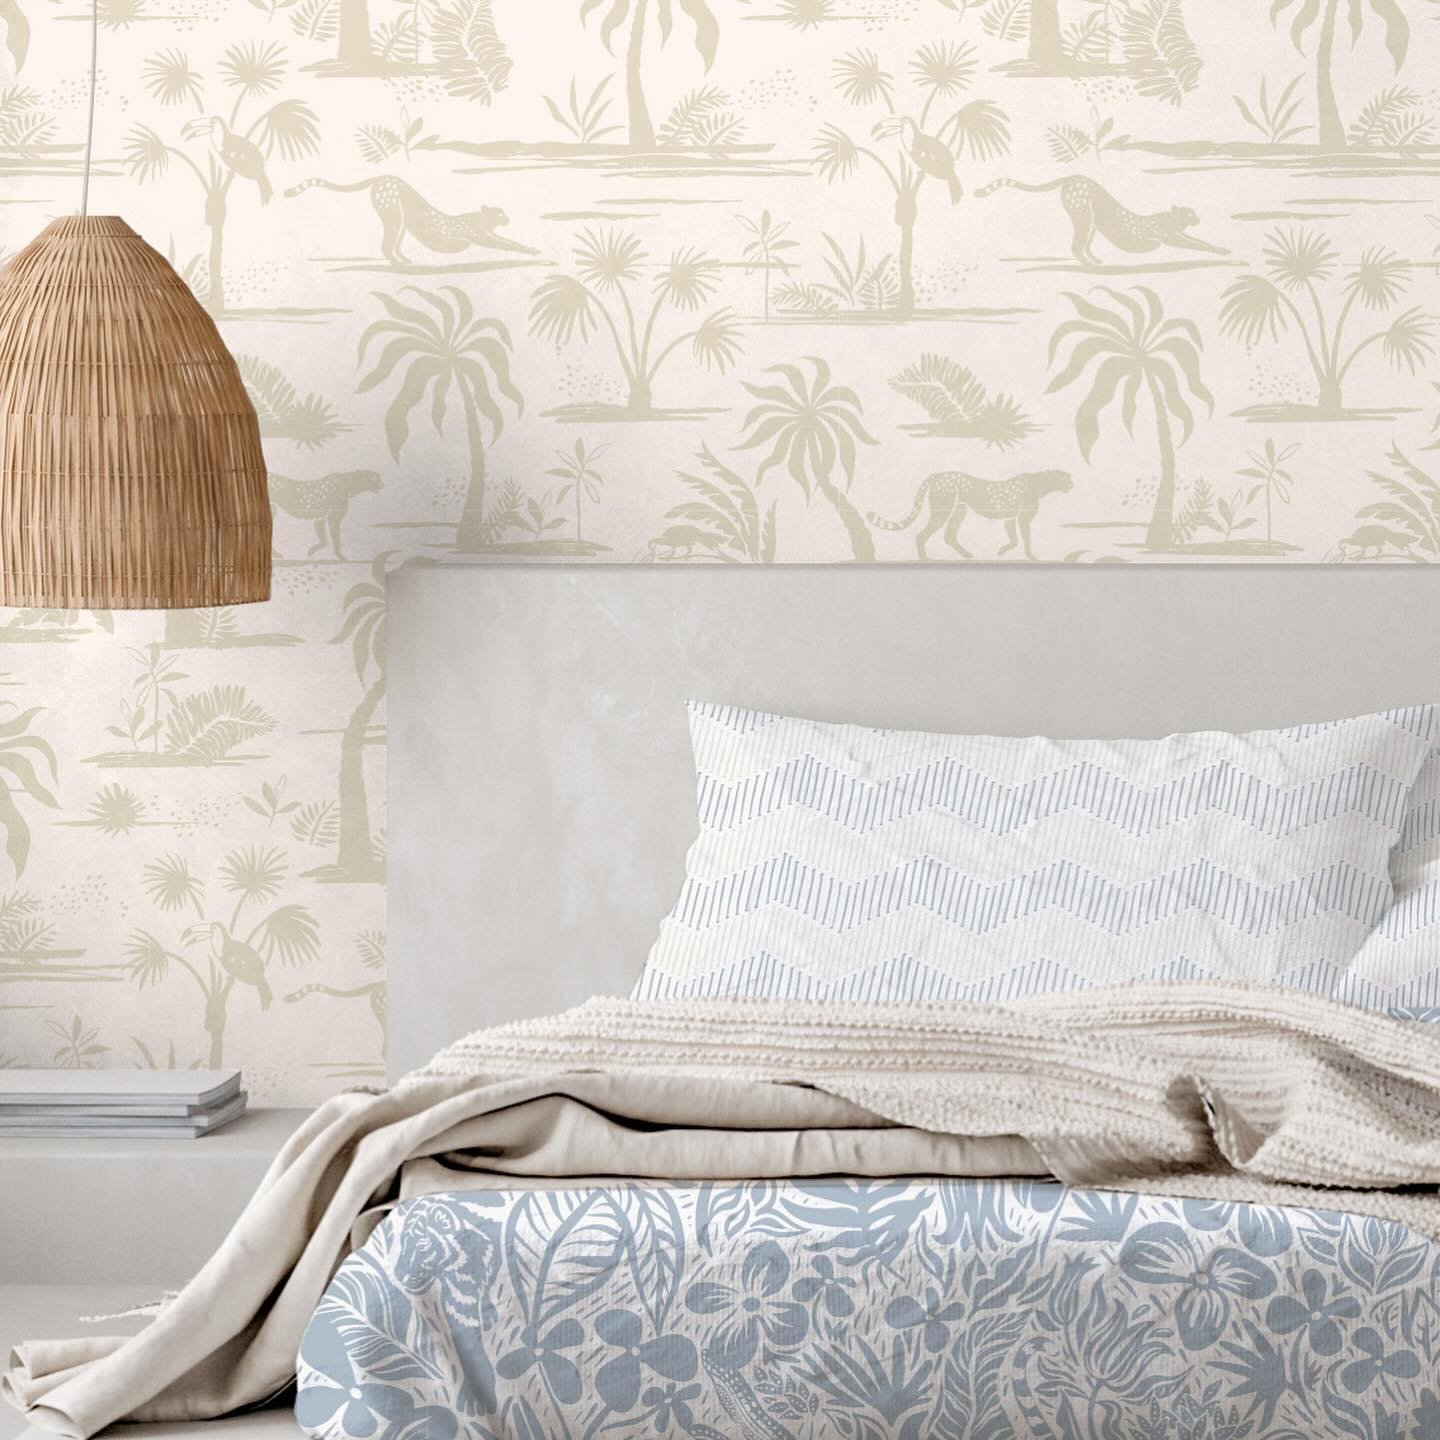 I love making beautiful pairings: My PARADISE FOUND wallpaper @greenplanet.wallpaper pairs with my VIVA OASIS Iceblue Whitewisp Duvet cover and ZIG ZAG AlabasterIceblue Sheets @spoonflower. 
#bedroomdecor #wallpaperandbedding #perfectpairs #coordinat